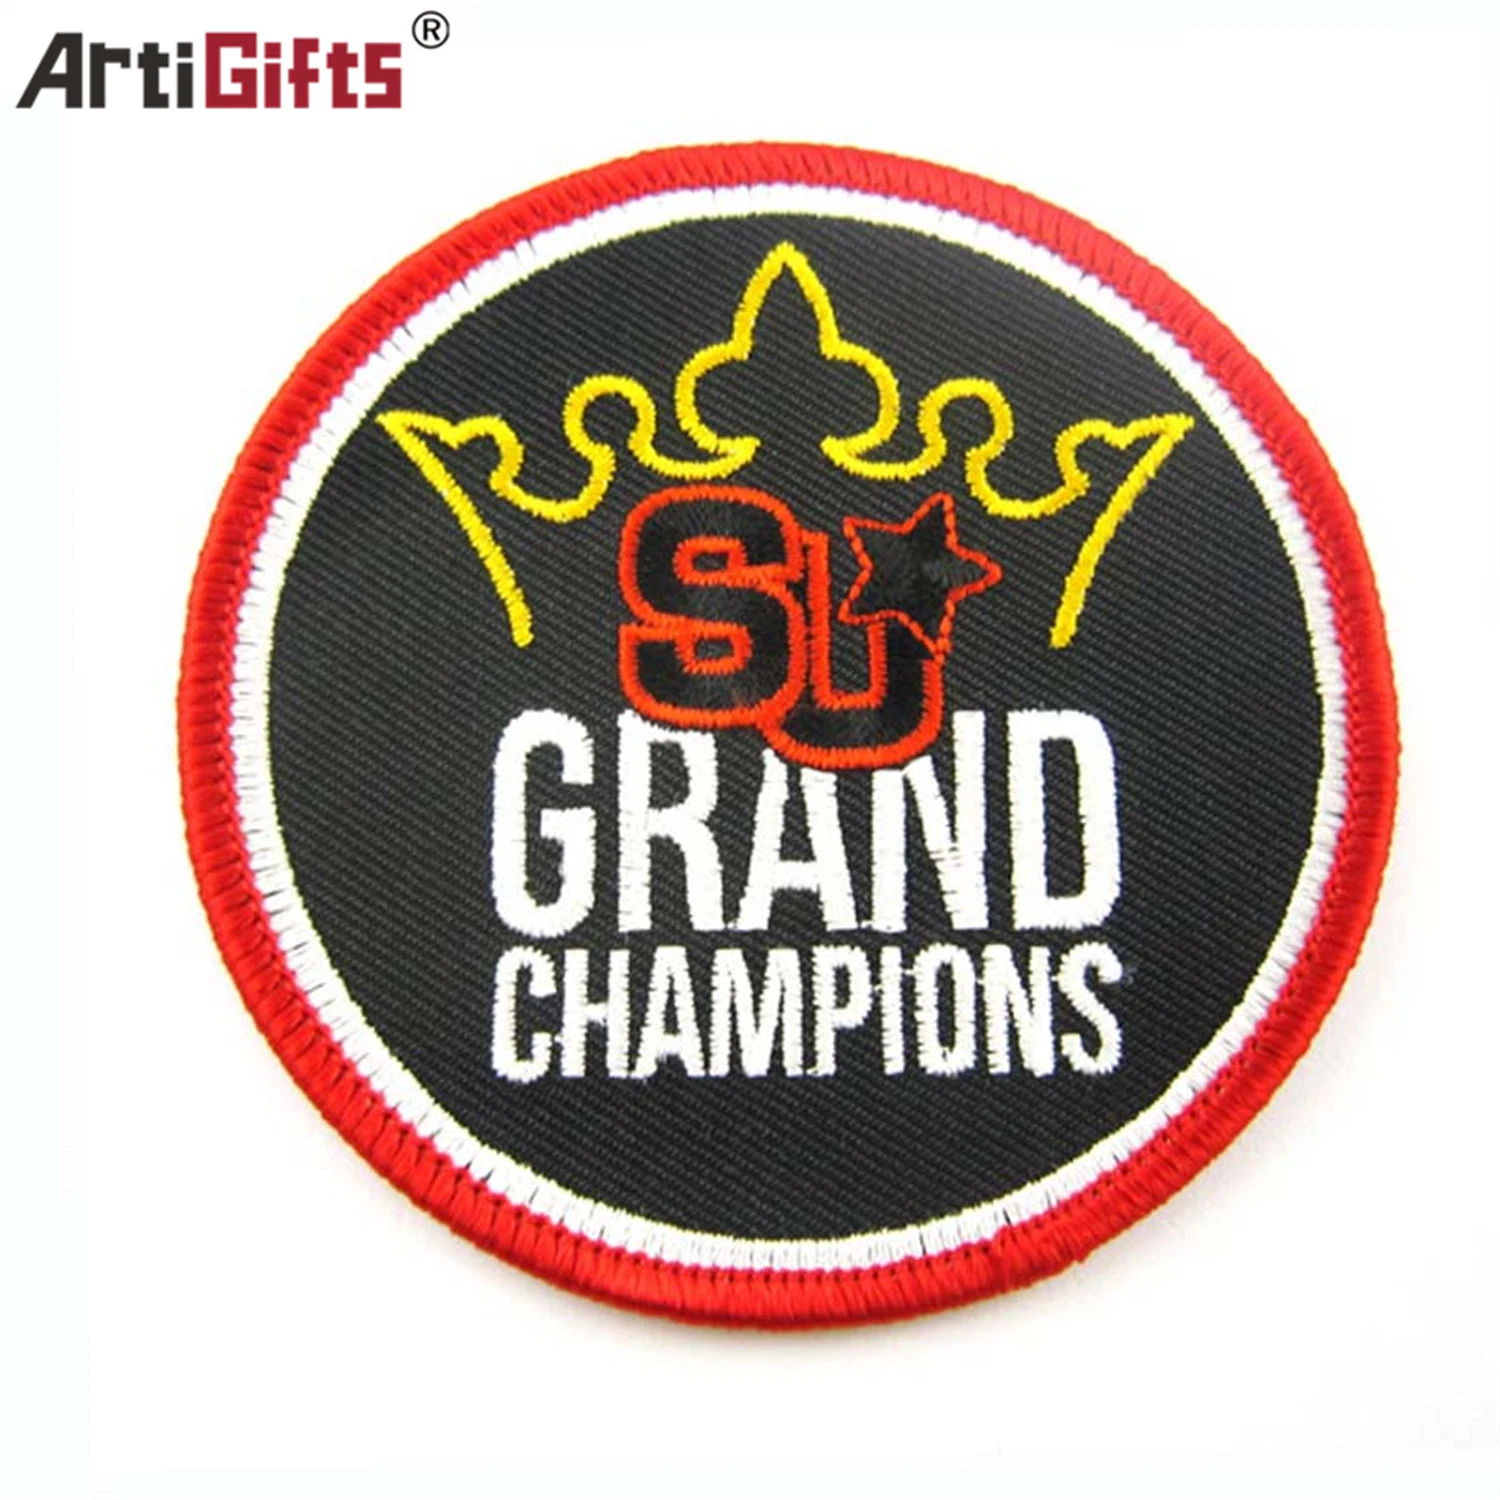 Custom Personal Fashion Badge Stitchwork Embroidered Patch for Clothing Label